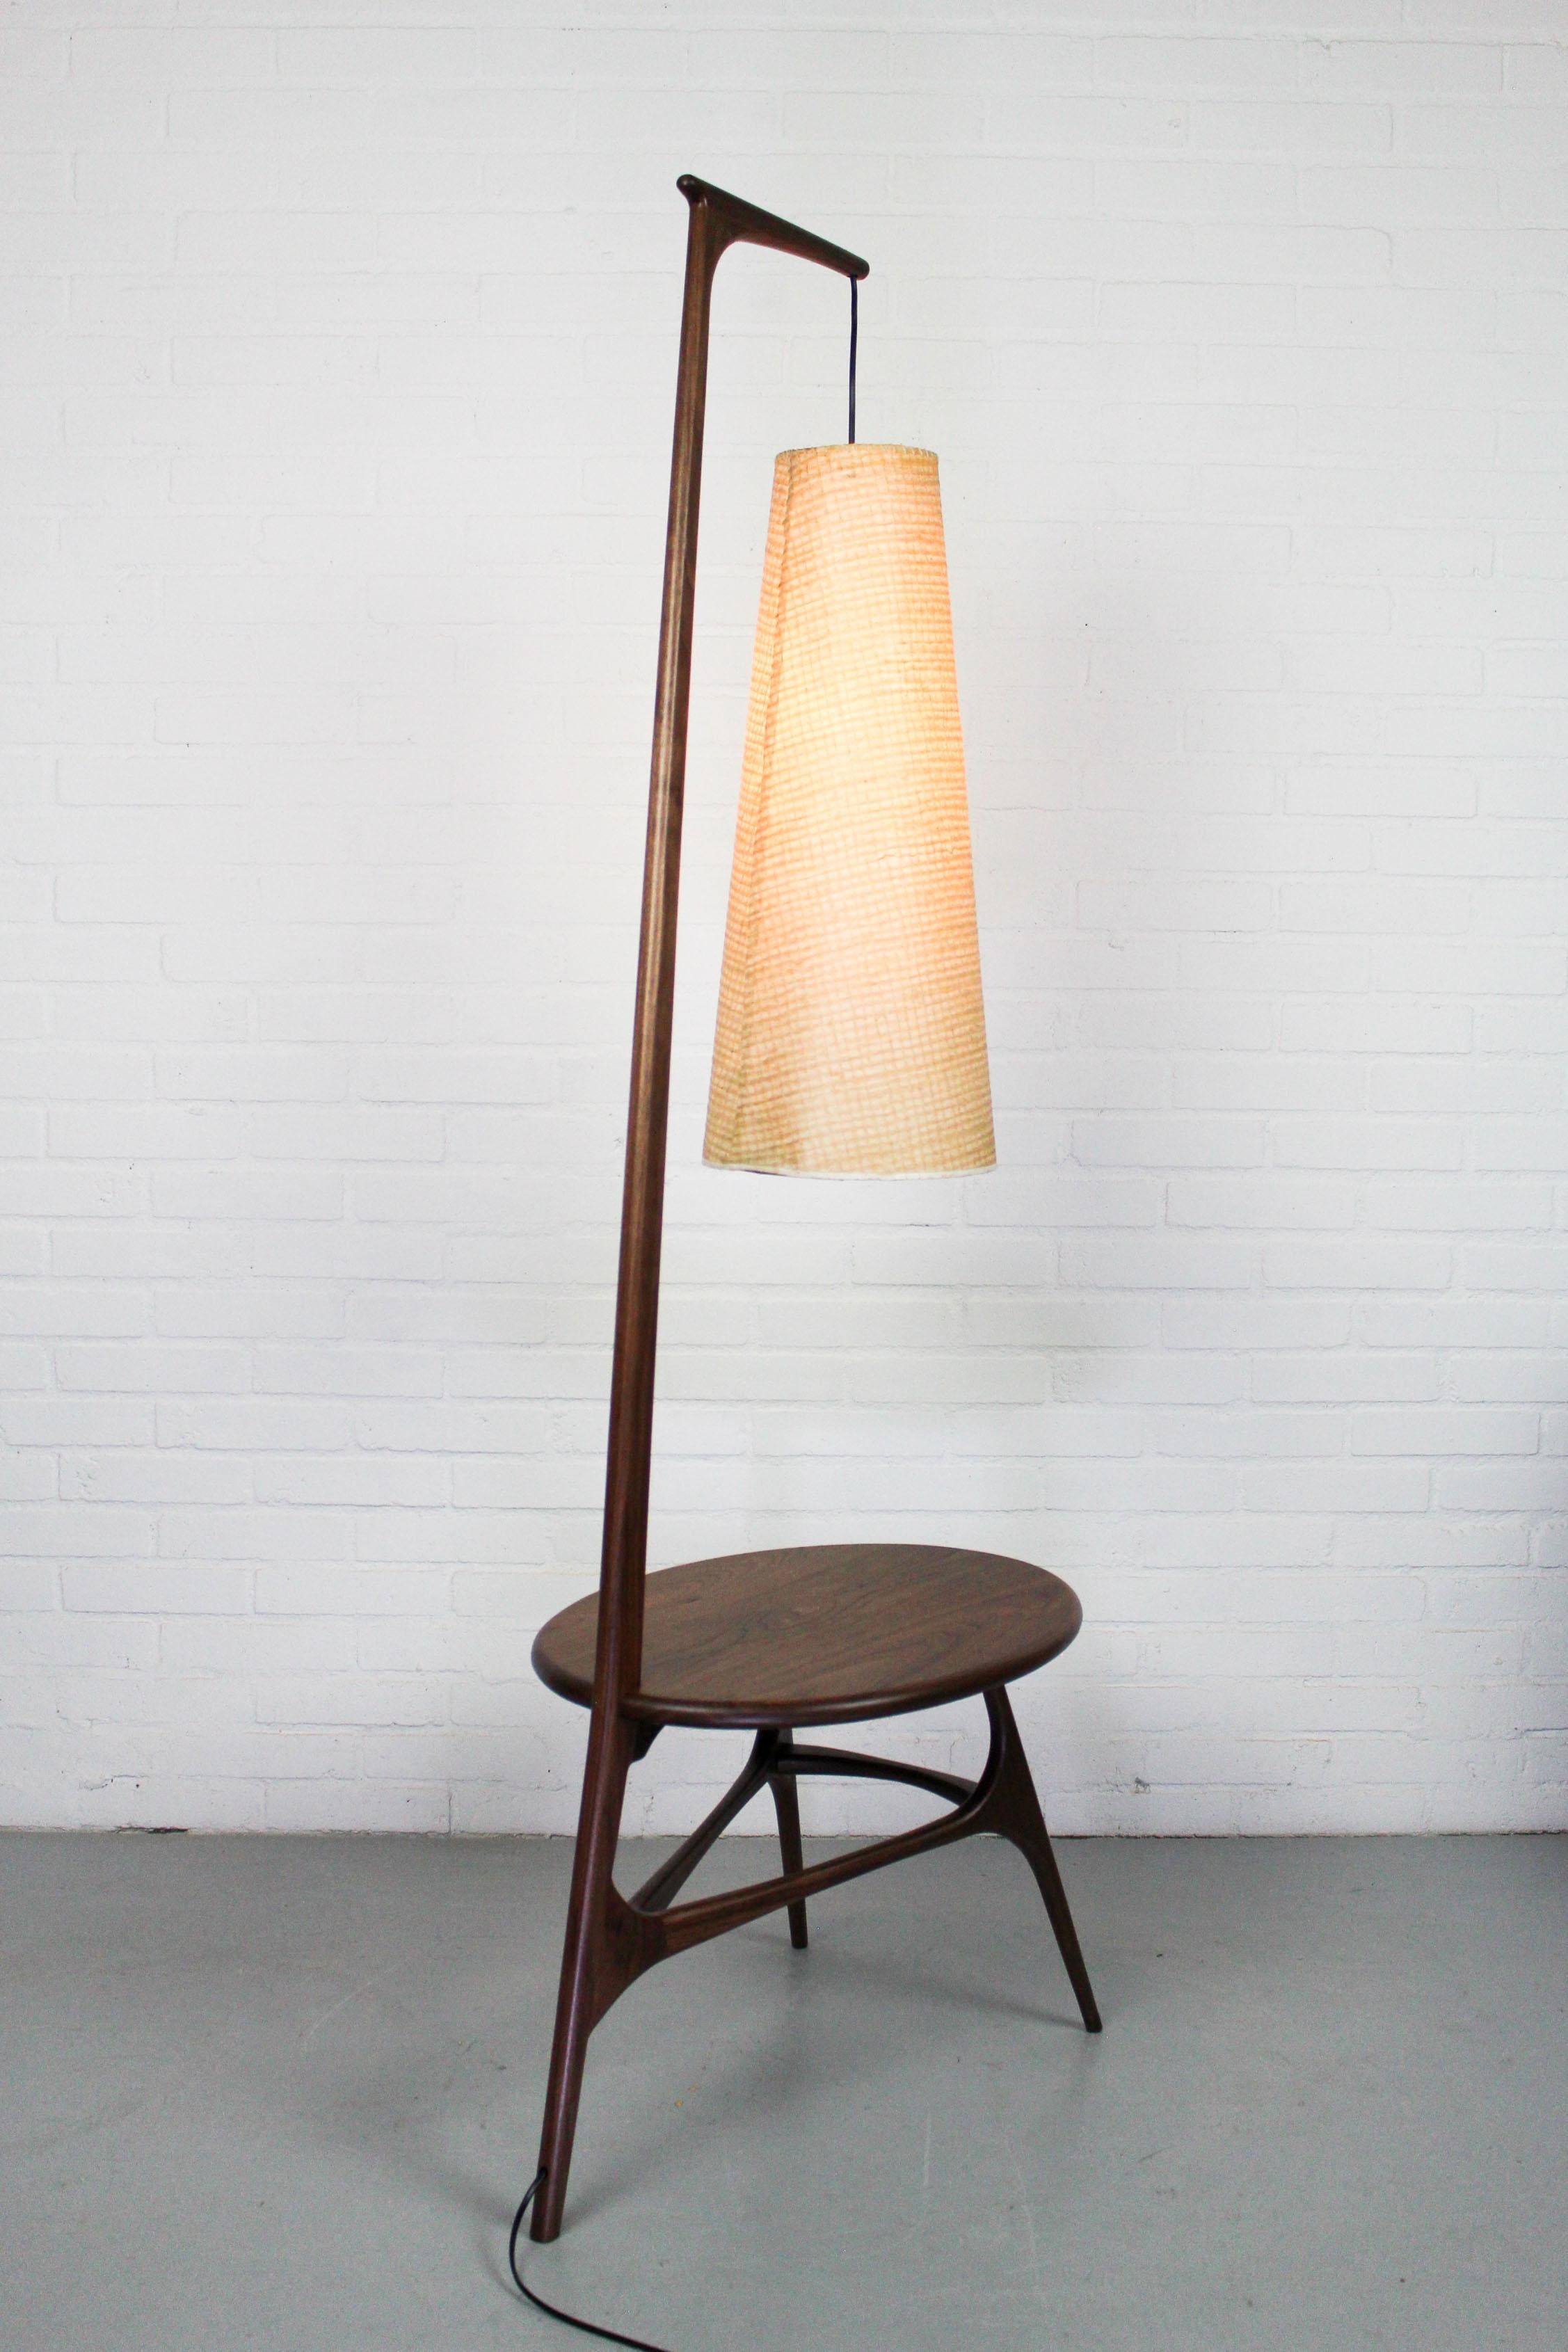 French Mid-Century Modern Lampshade 'Rispal' with Organic American Nut Table